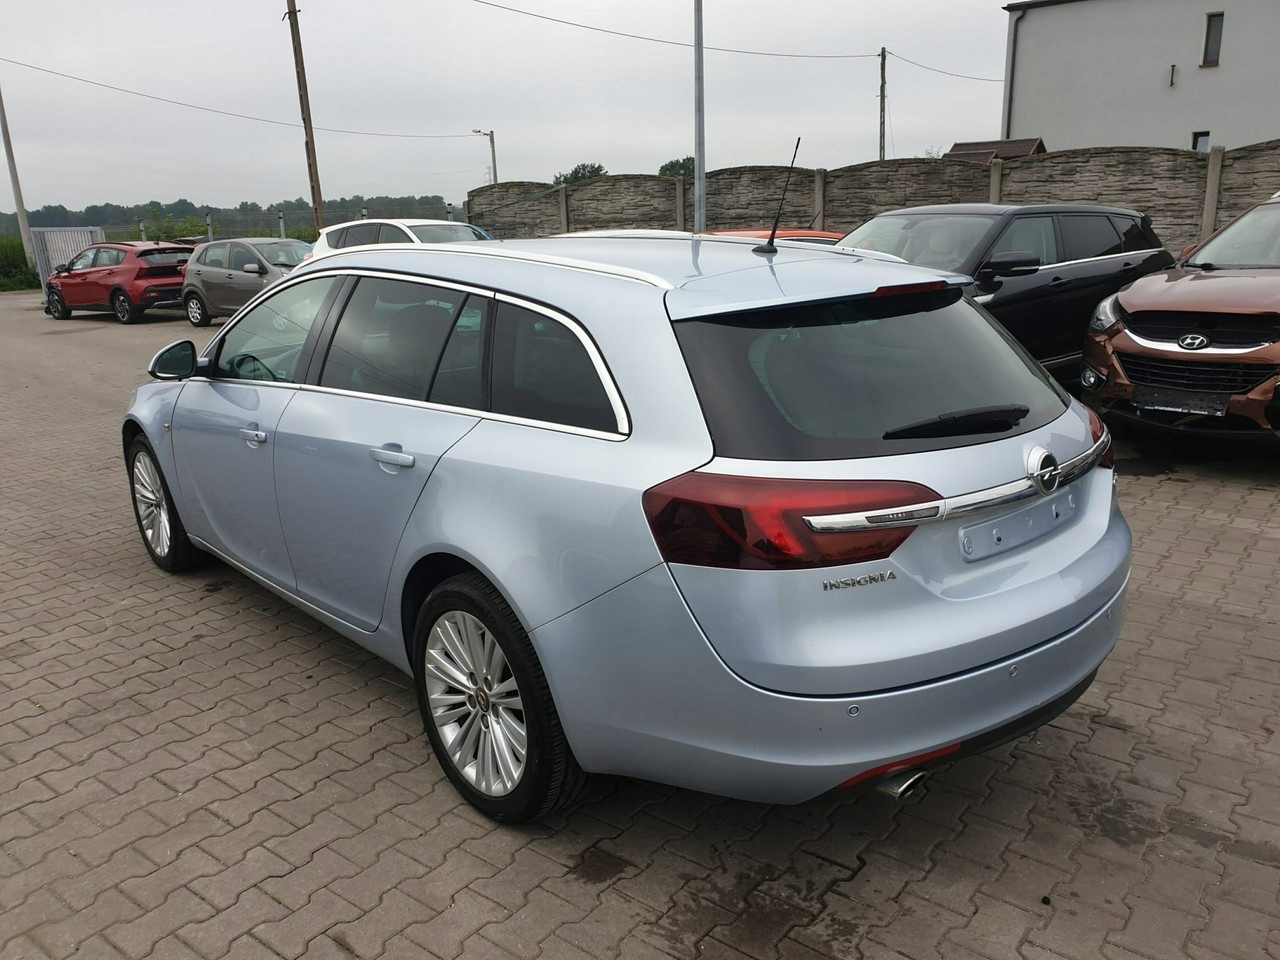 Opel Insignia A Sports 2012 used to buy in Poland, price of used Opel  Insignia A Sports 2012 in Warsaw